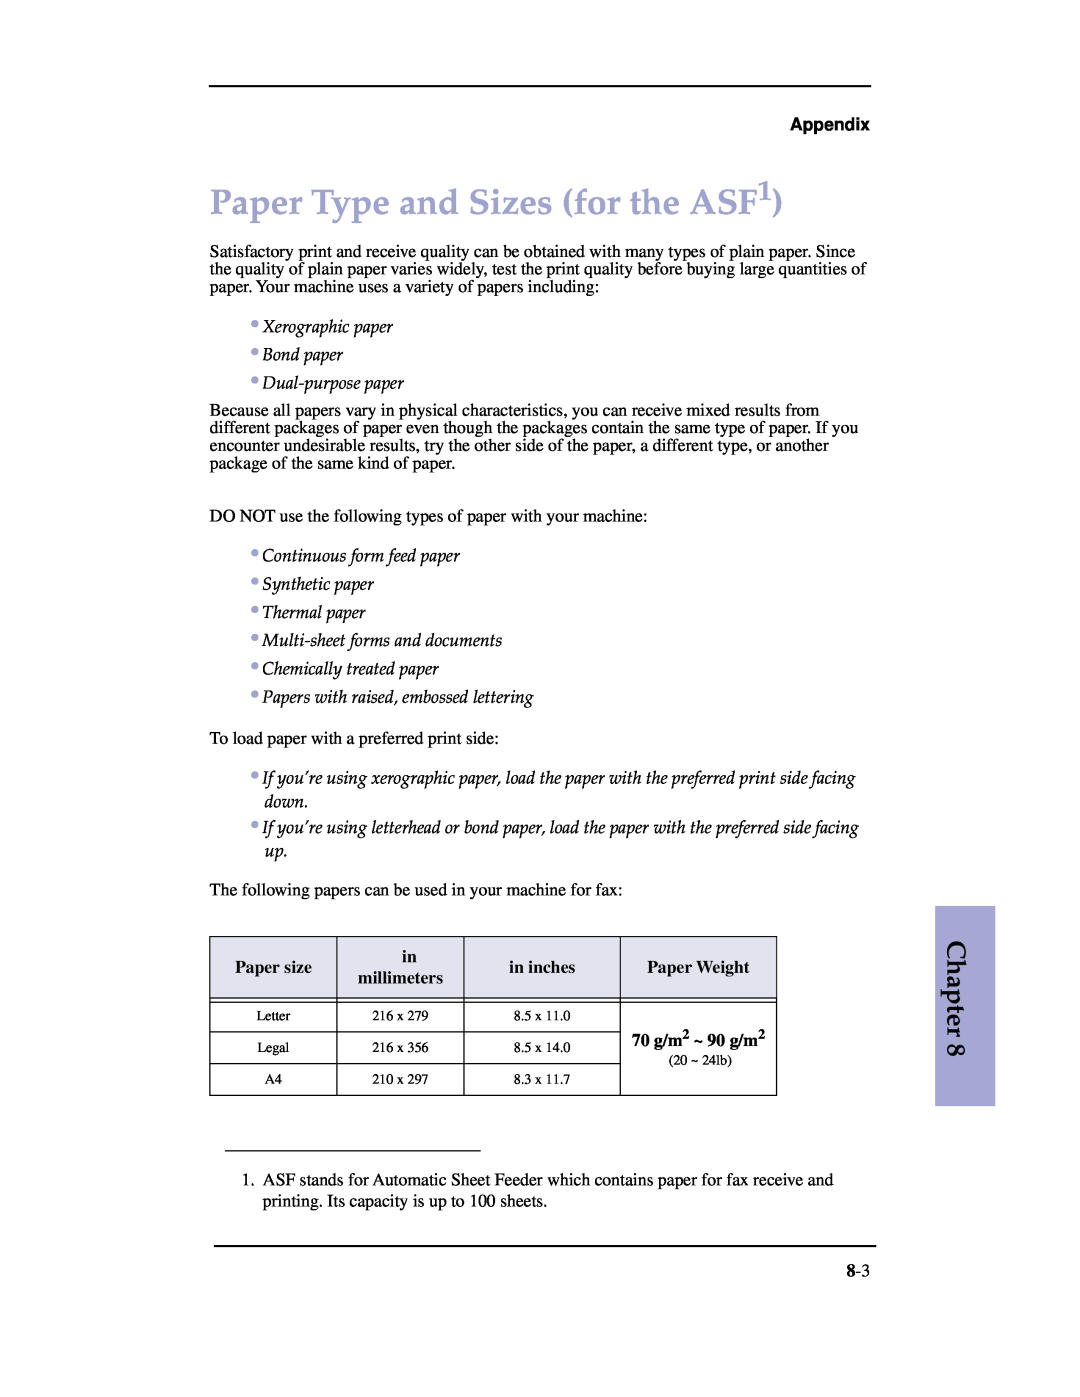 Samsung SF-3100 Paper Type and Sizes for the ASF1, Paper size, in inches, Paper Weight, millimeters, 70 g/m 2 ~ 90 g/m 